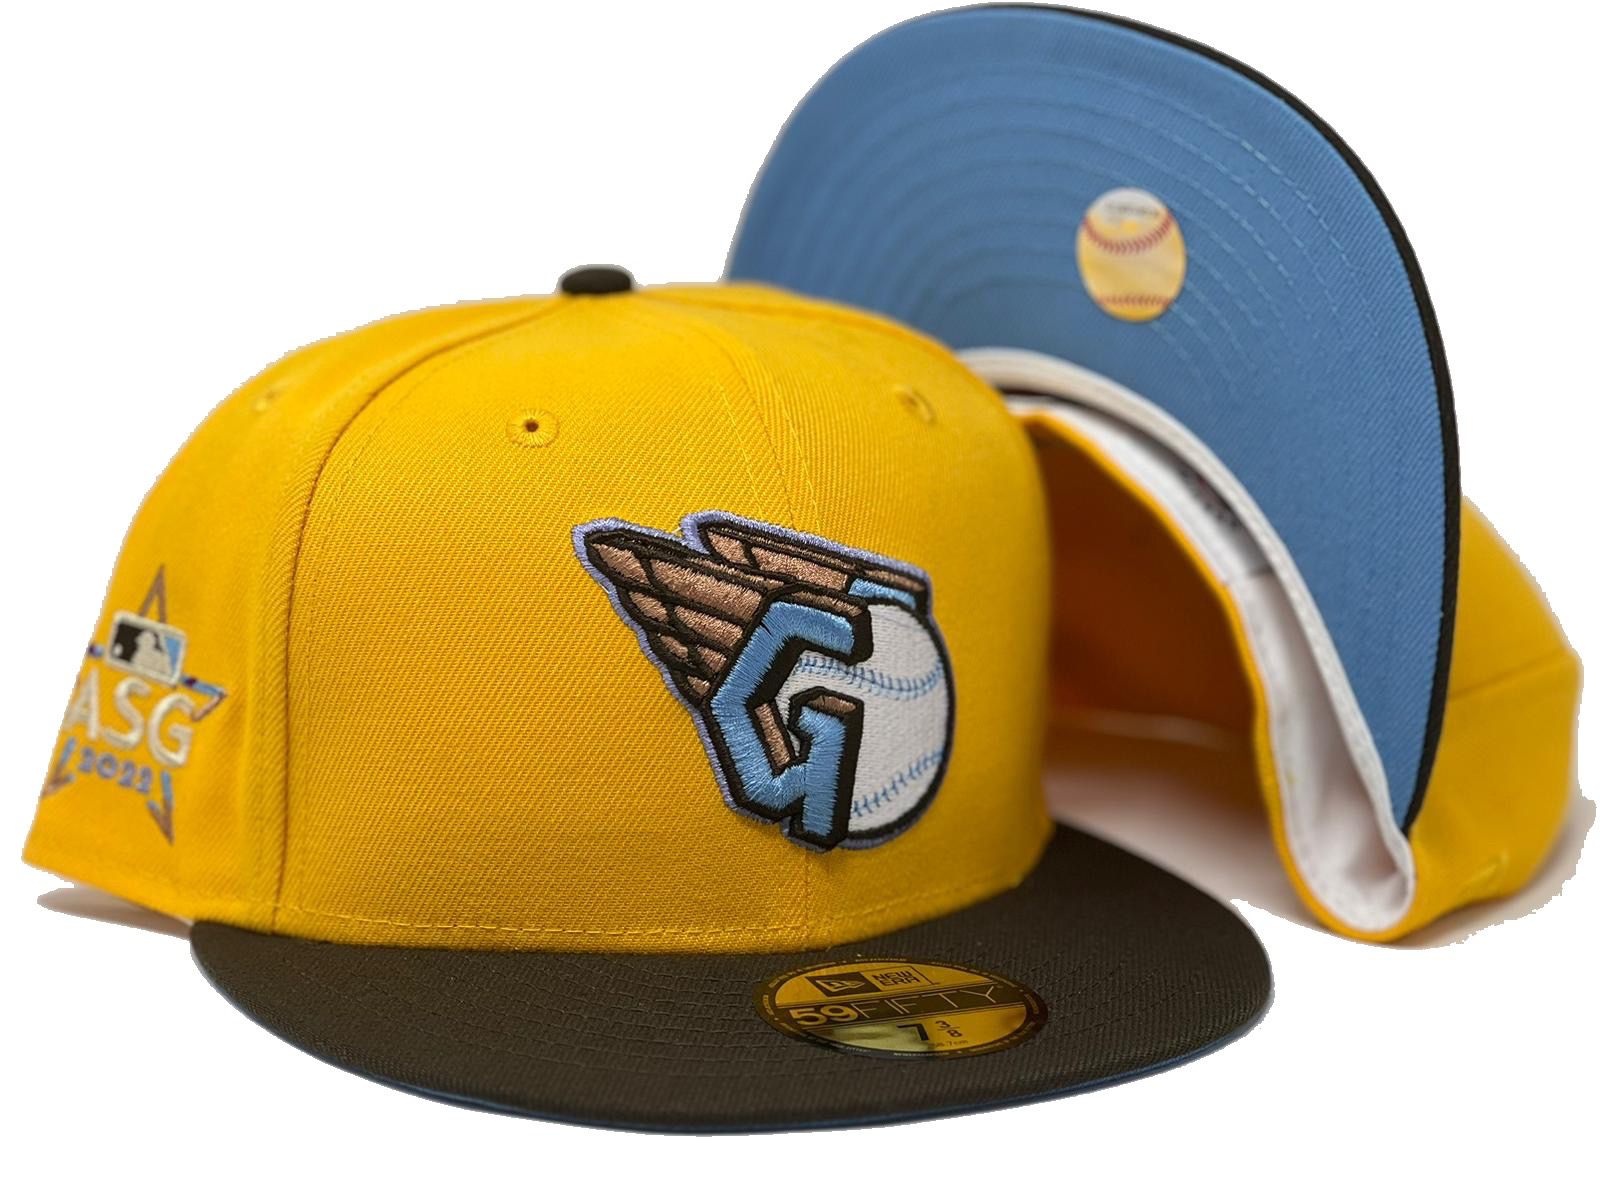 Cleveland Guardians unveil on-field baseball caps for 2022 season